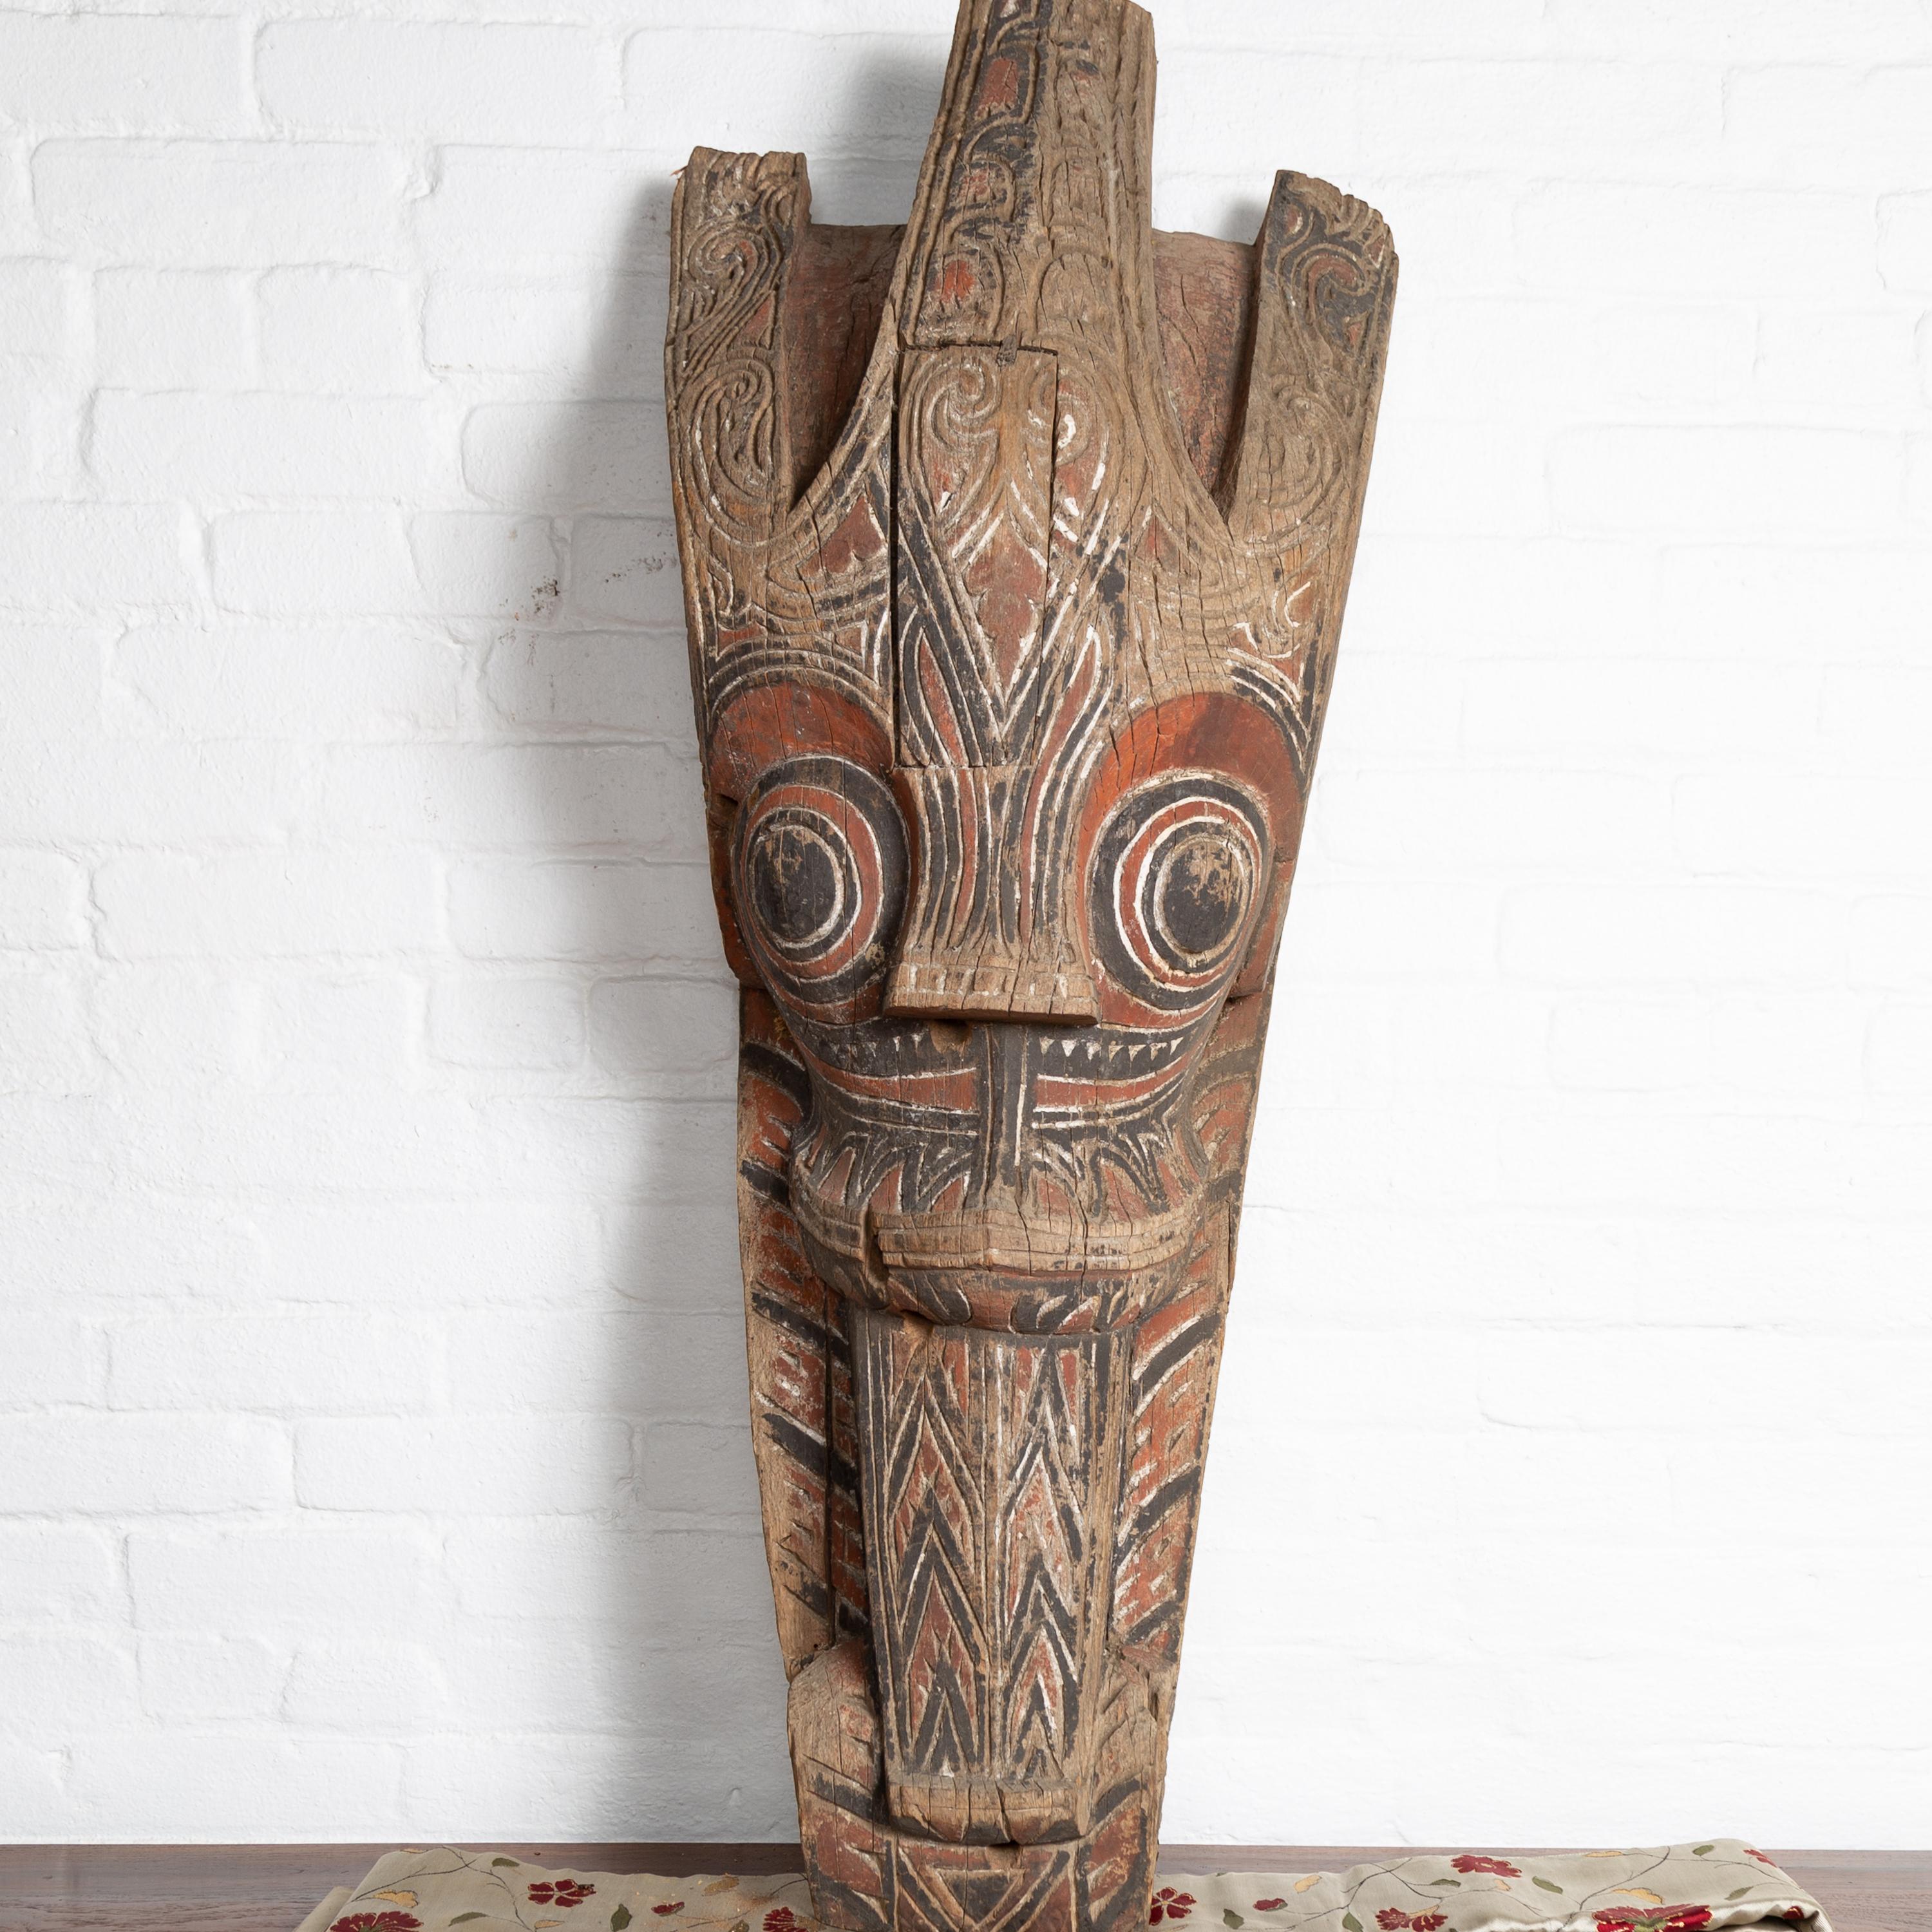 A large antique hand carved tribal carving from the Batak People, northern Sumatra, called a Singa Singa. Attracting our eye with its charismatic presence, this large hand carved sculpture from the Indonesian island of Sumatra is one of the most